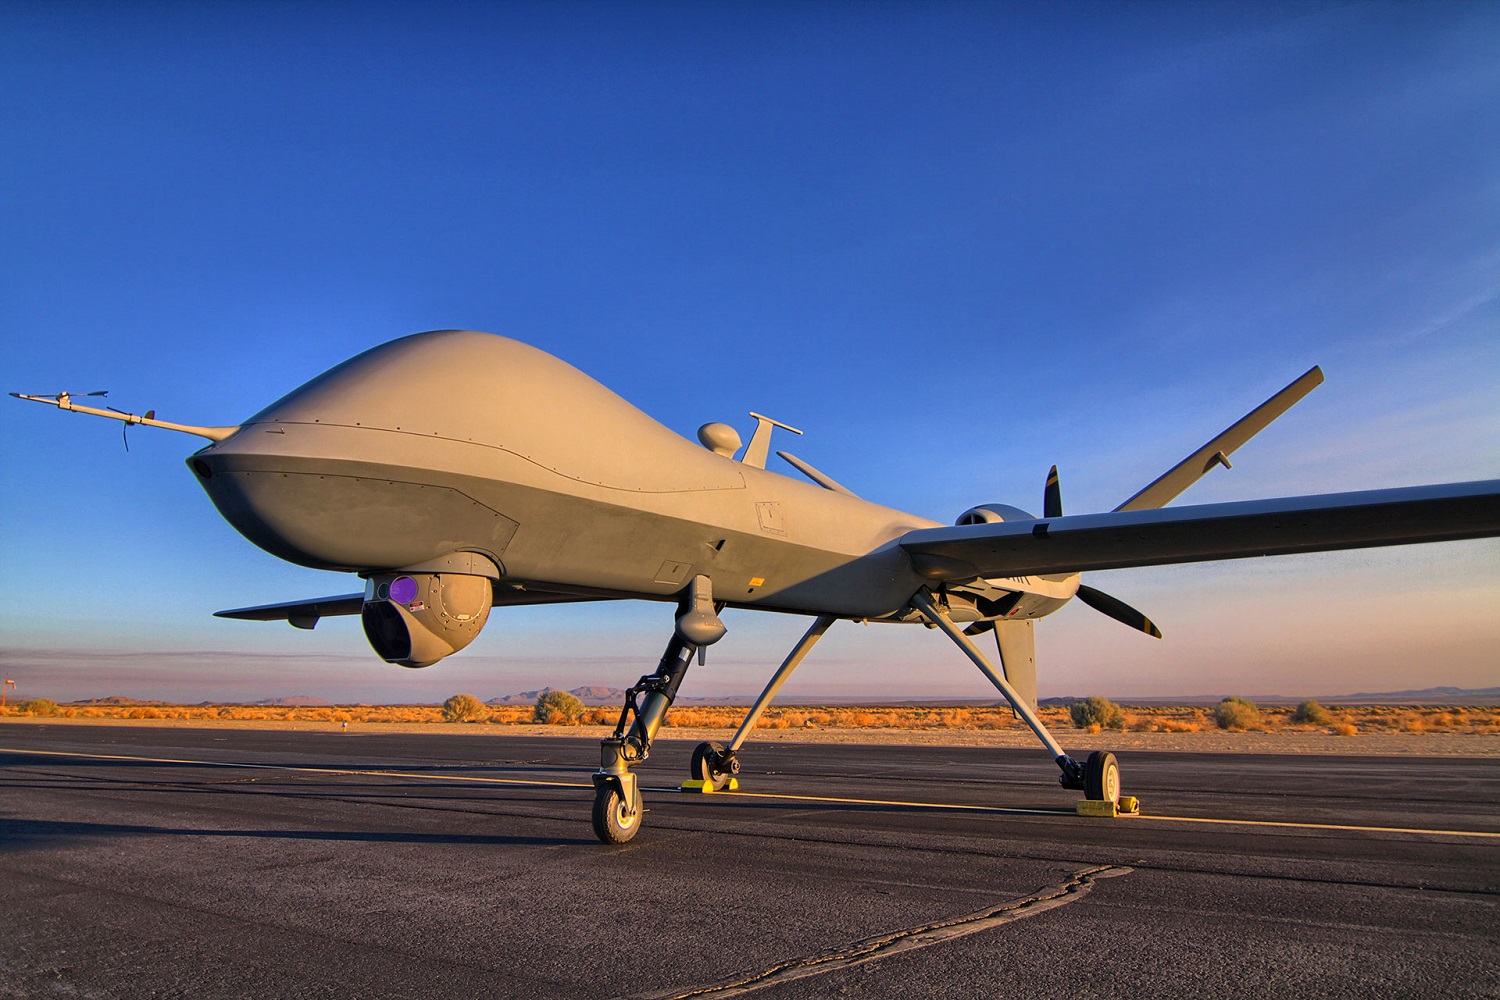 General Atomics Wins $28 Million to Arm French MQ-9 Reaper Unmanned Aerial Vehicles